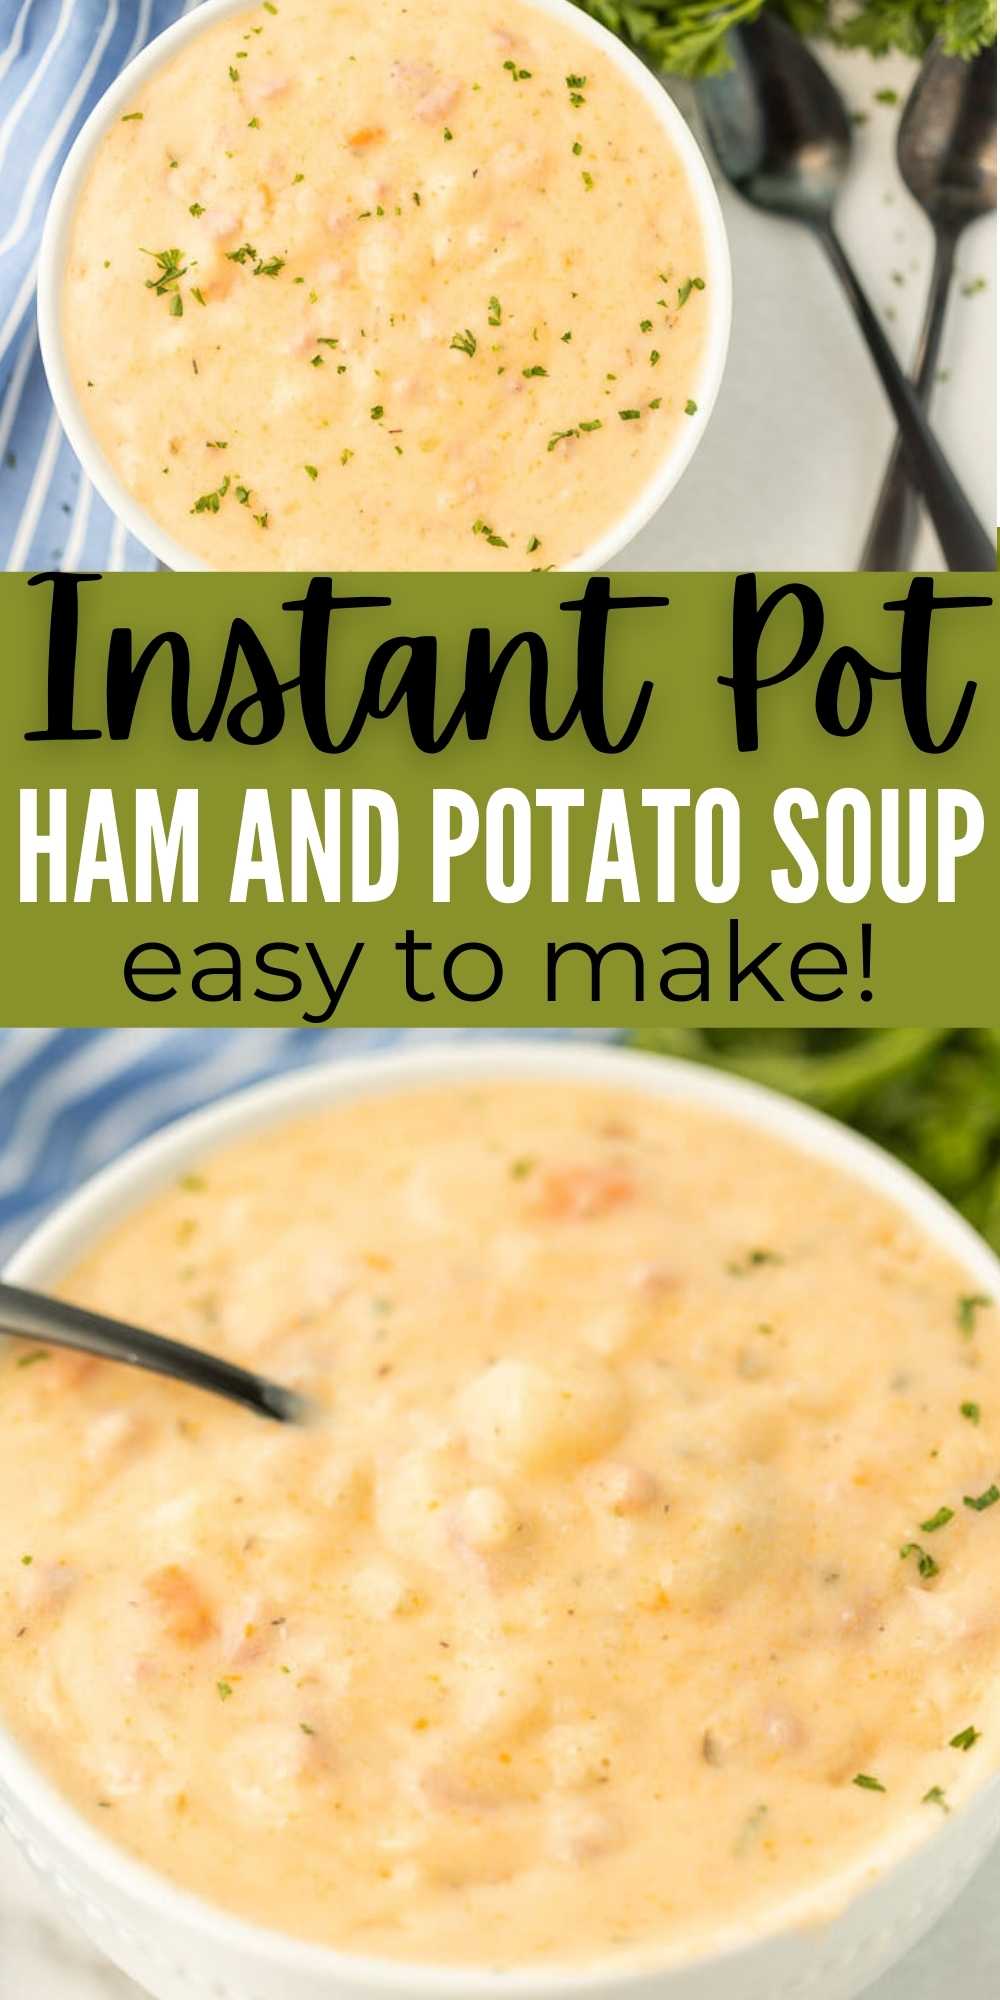 Instant pot ham potato soup can be ready in just 15 minutes. This comfort food meal is hearty with lots of ham, potatoes and savory broth. This easy ham and potato soup is easy to make in a pressure cooker.  #eatingonadime #instantpotrecipes #souprecipes #potatosouprecipes 
